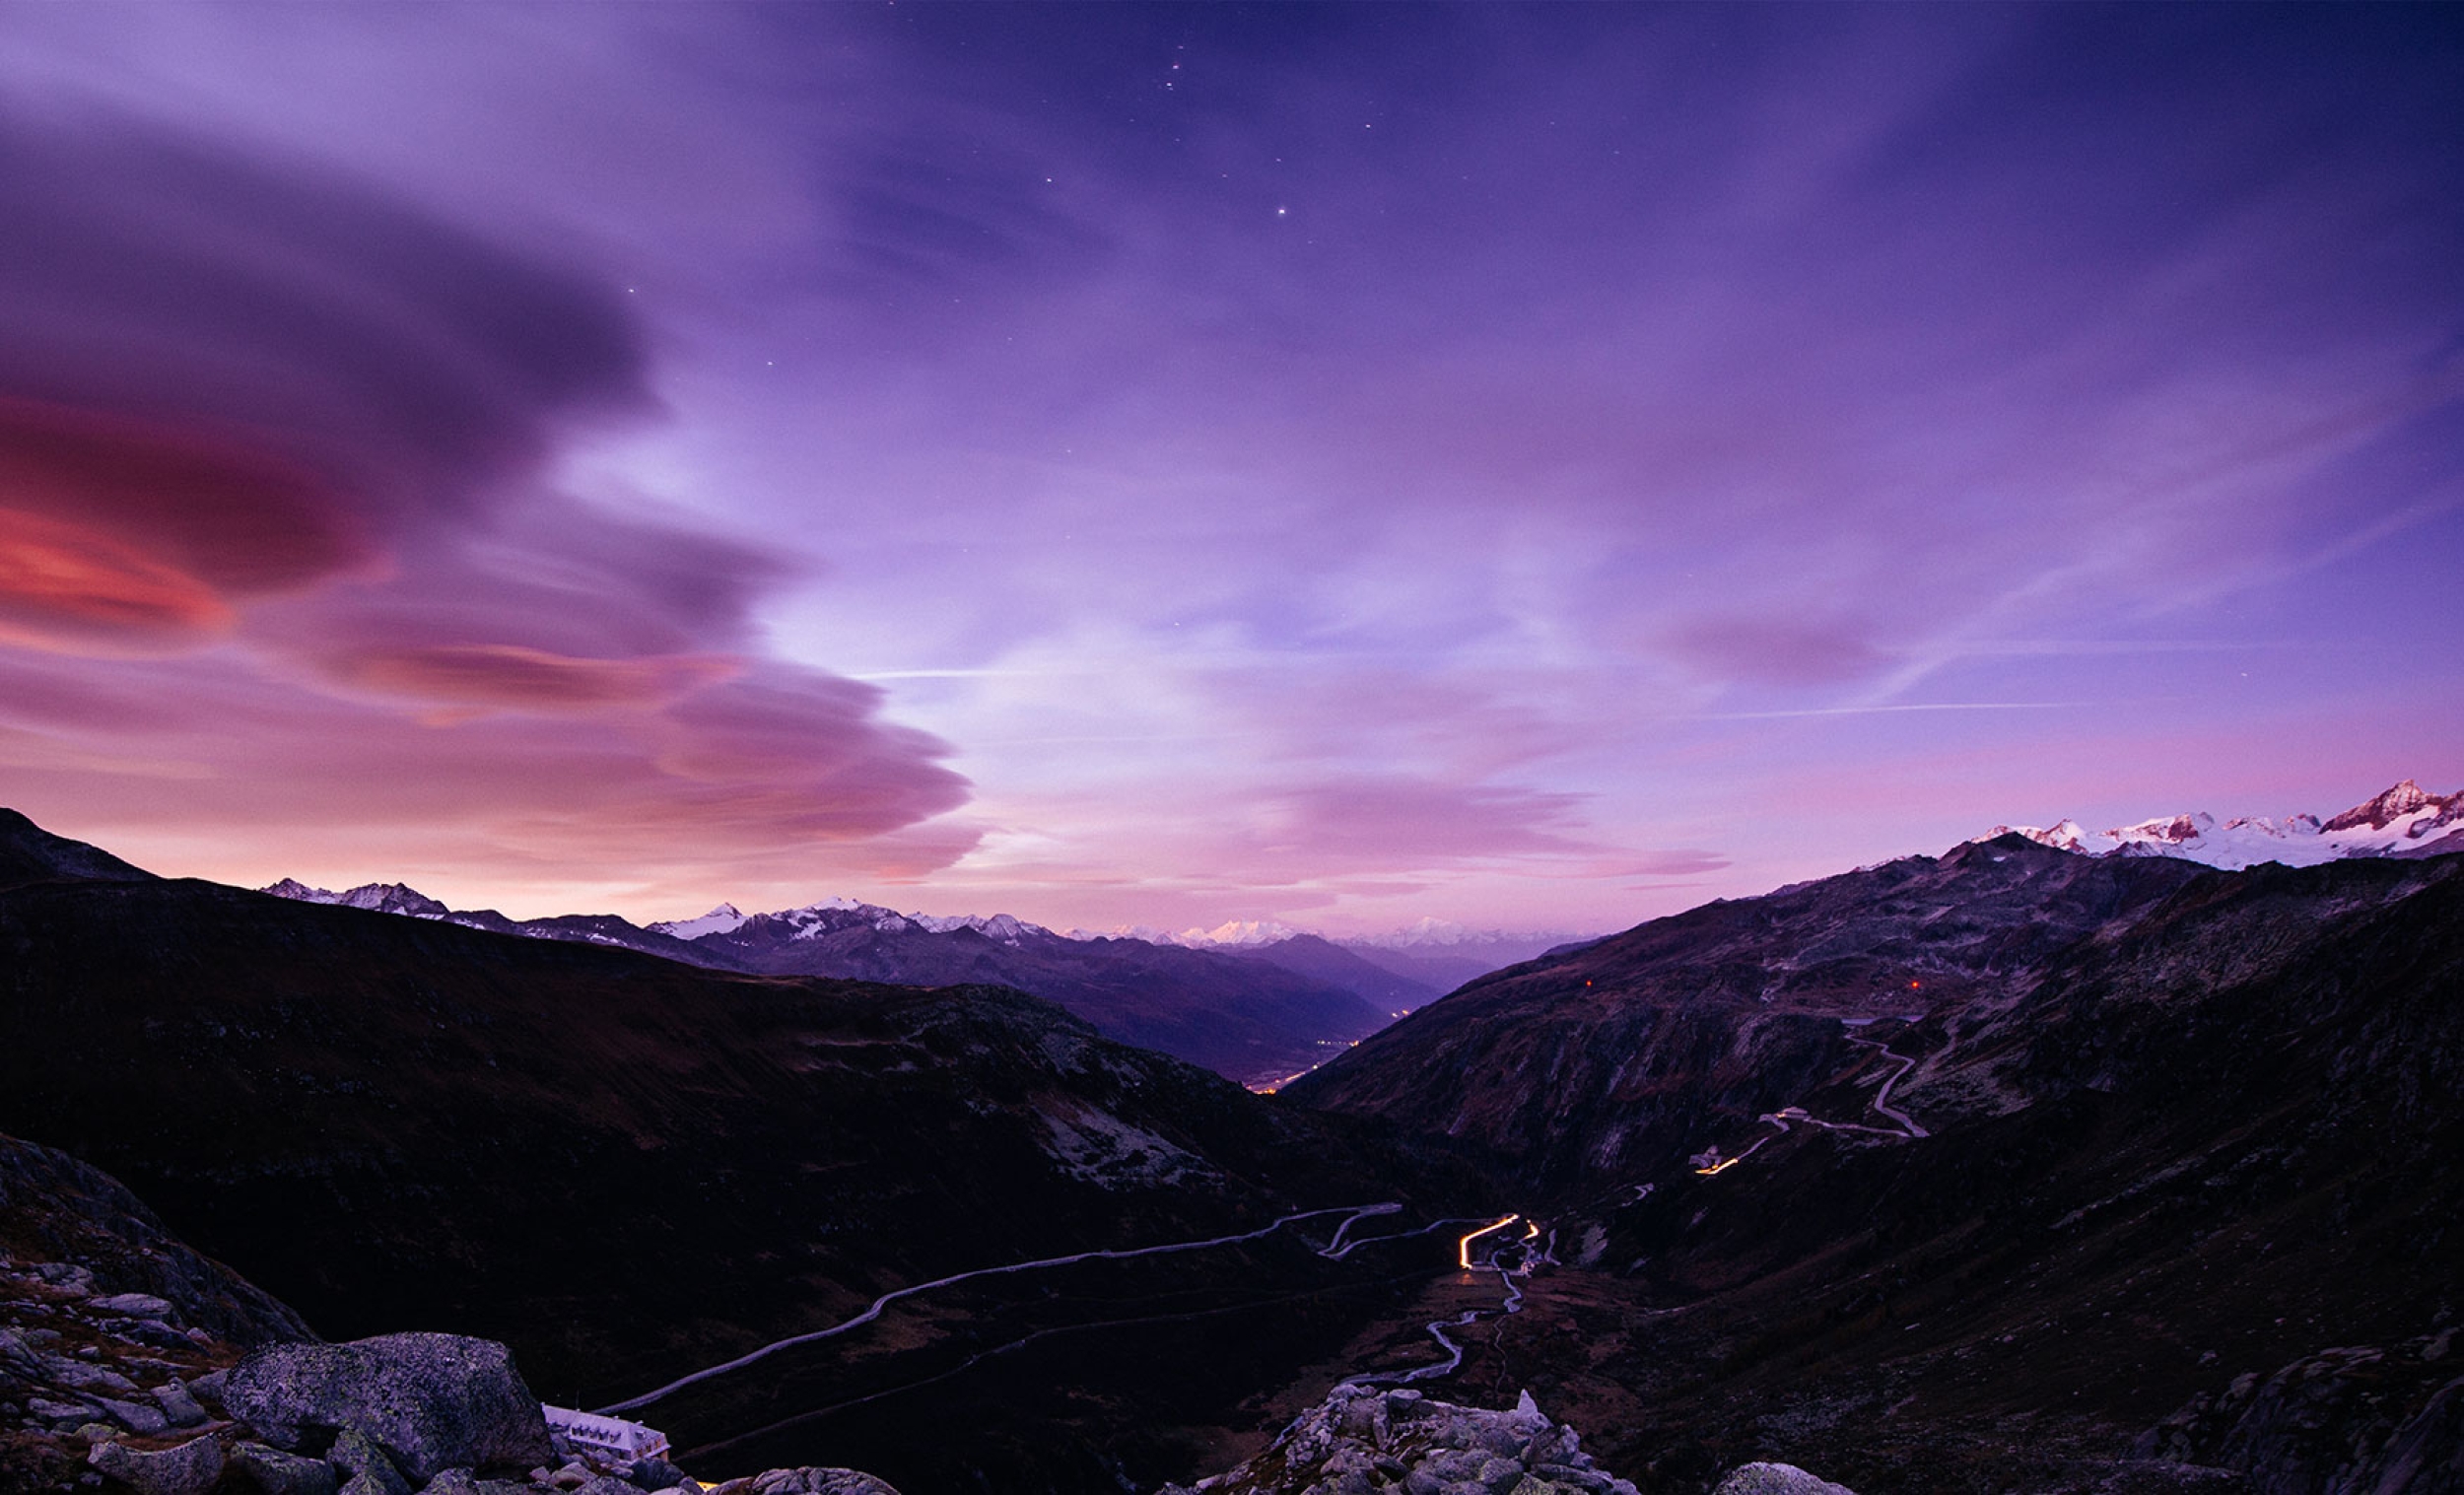 Beautiful landscape of mountains and purple and pink skies – small roads lay in the distance ahead.